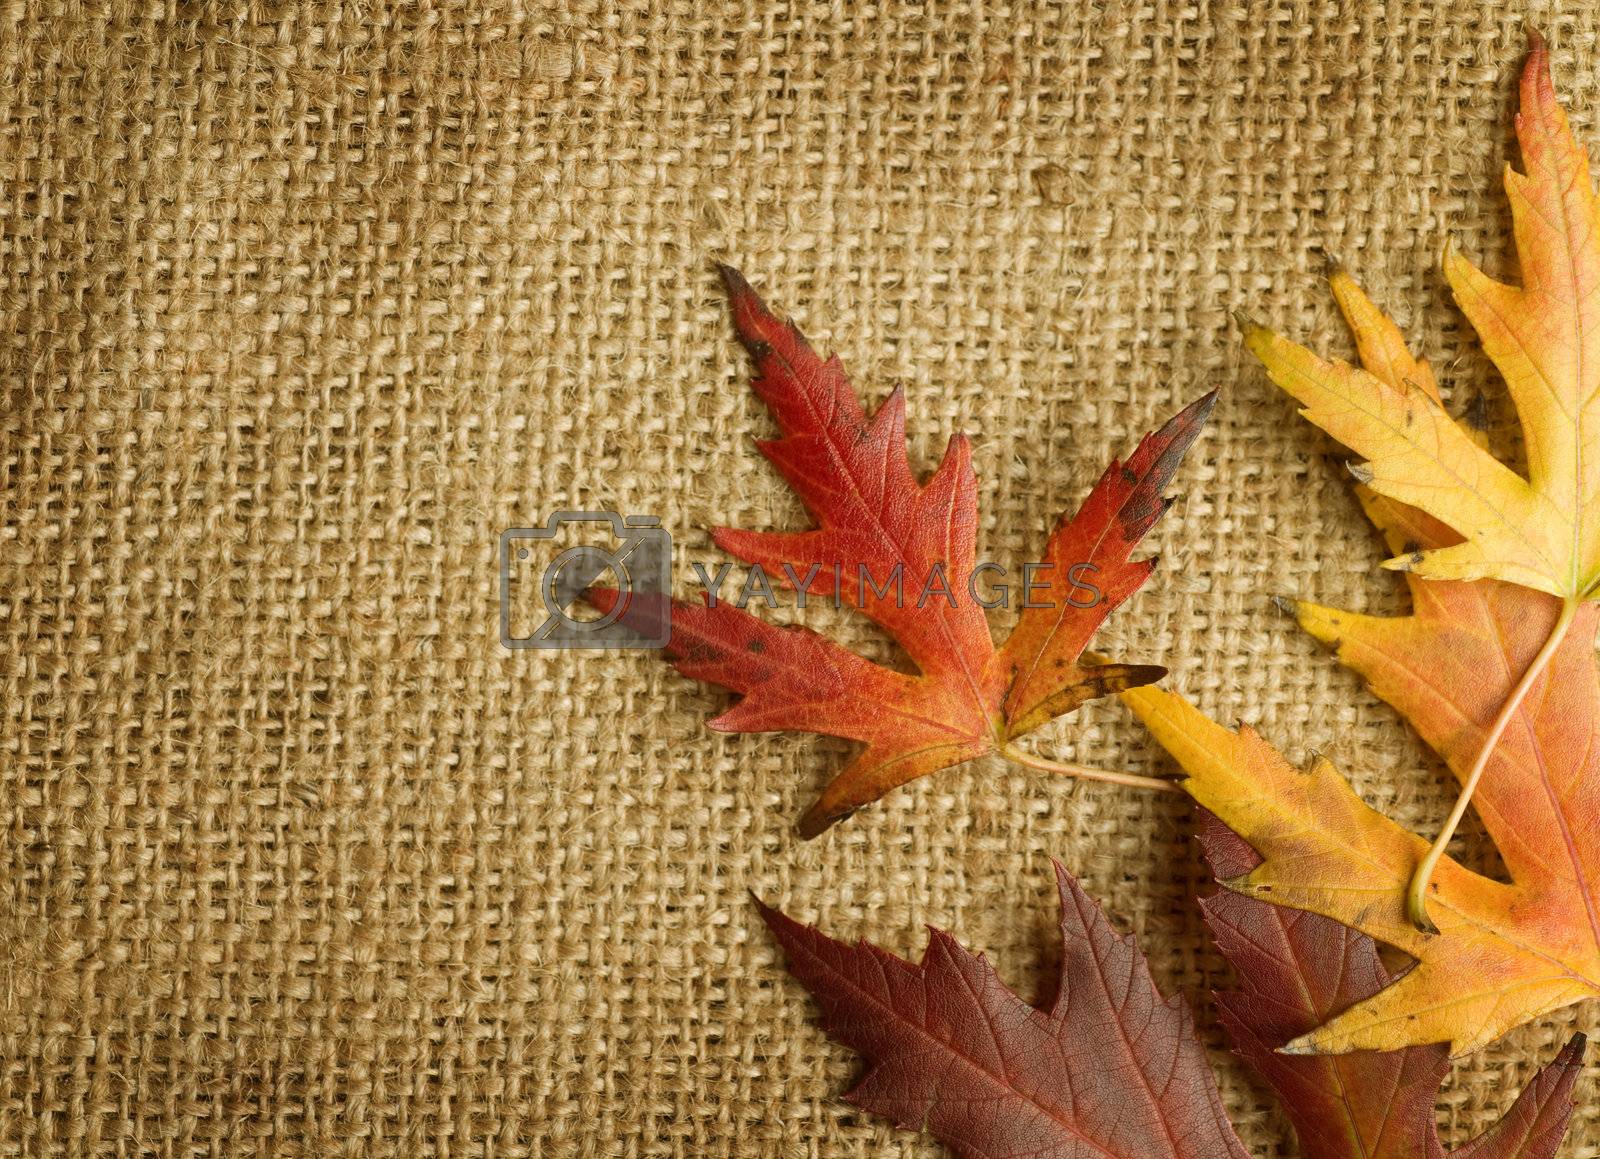 Royalty free image of Autumn Leaves over Burlap background by SubbotinaA